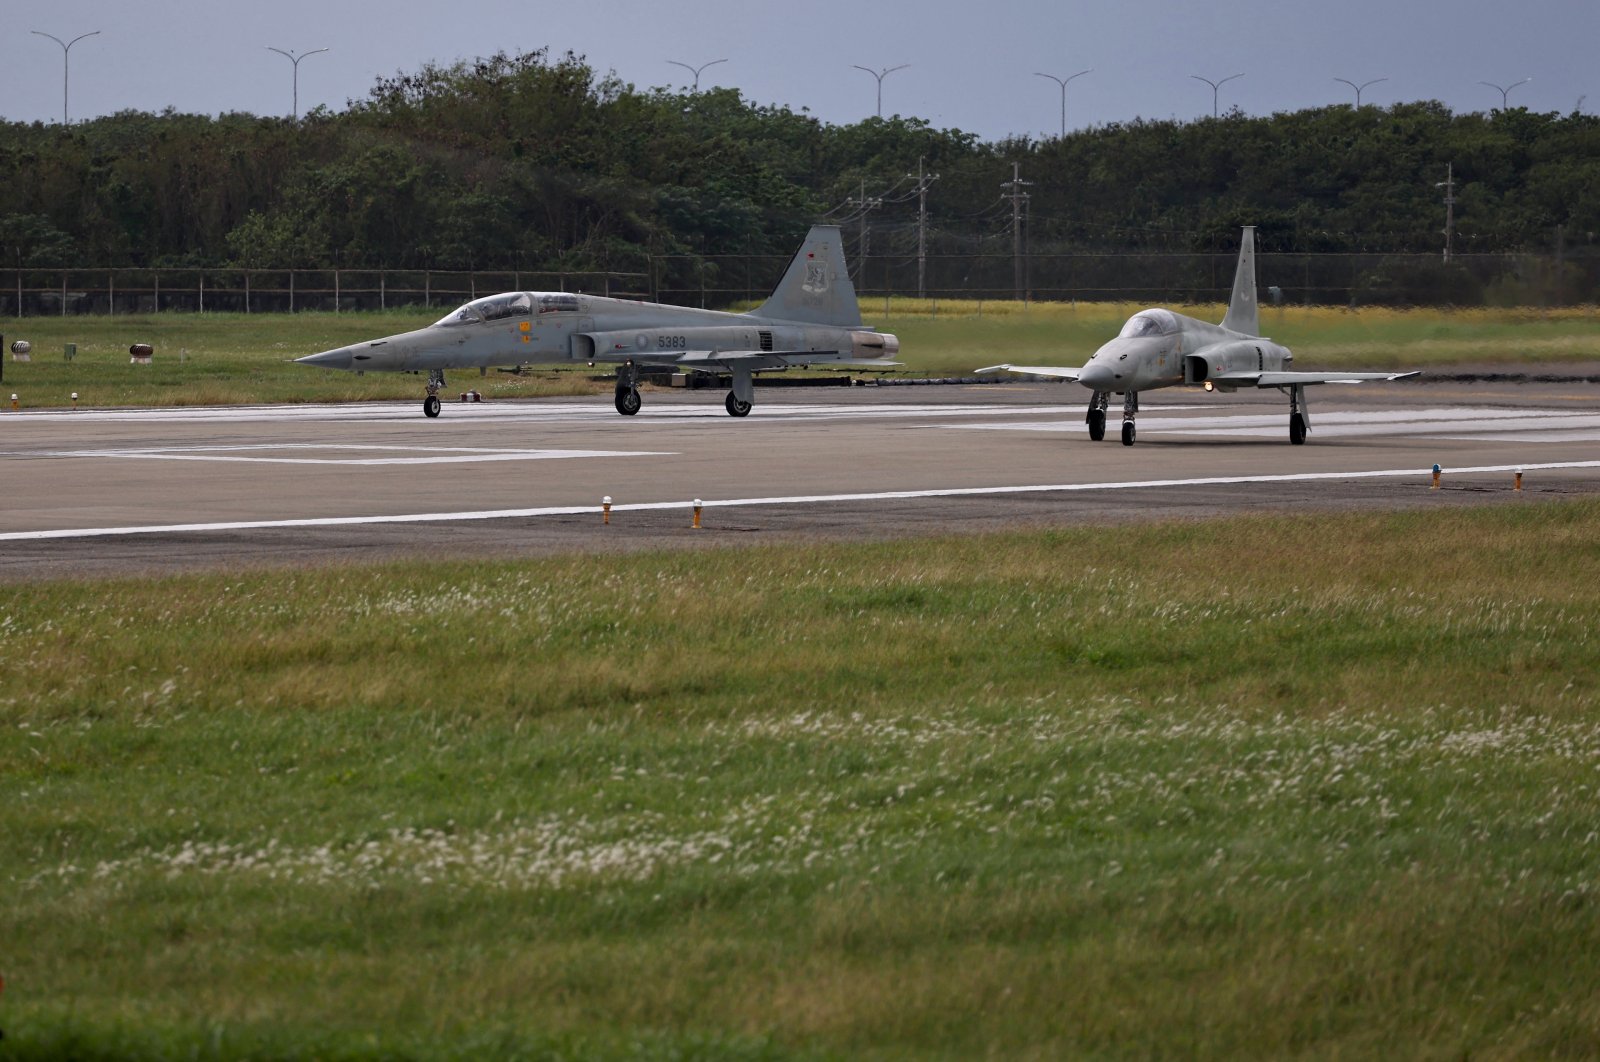 Two F-5 fighter jets are seen during practice at Chihhang Air Base in Taitung, Taiwan, Nov. 16, 2022. (Reuters Photo)